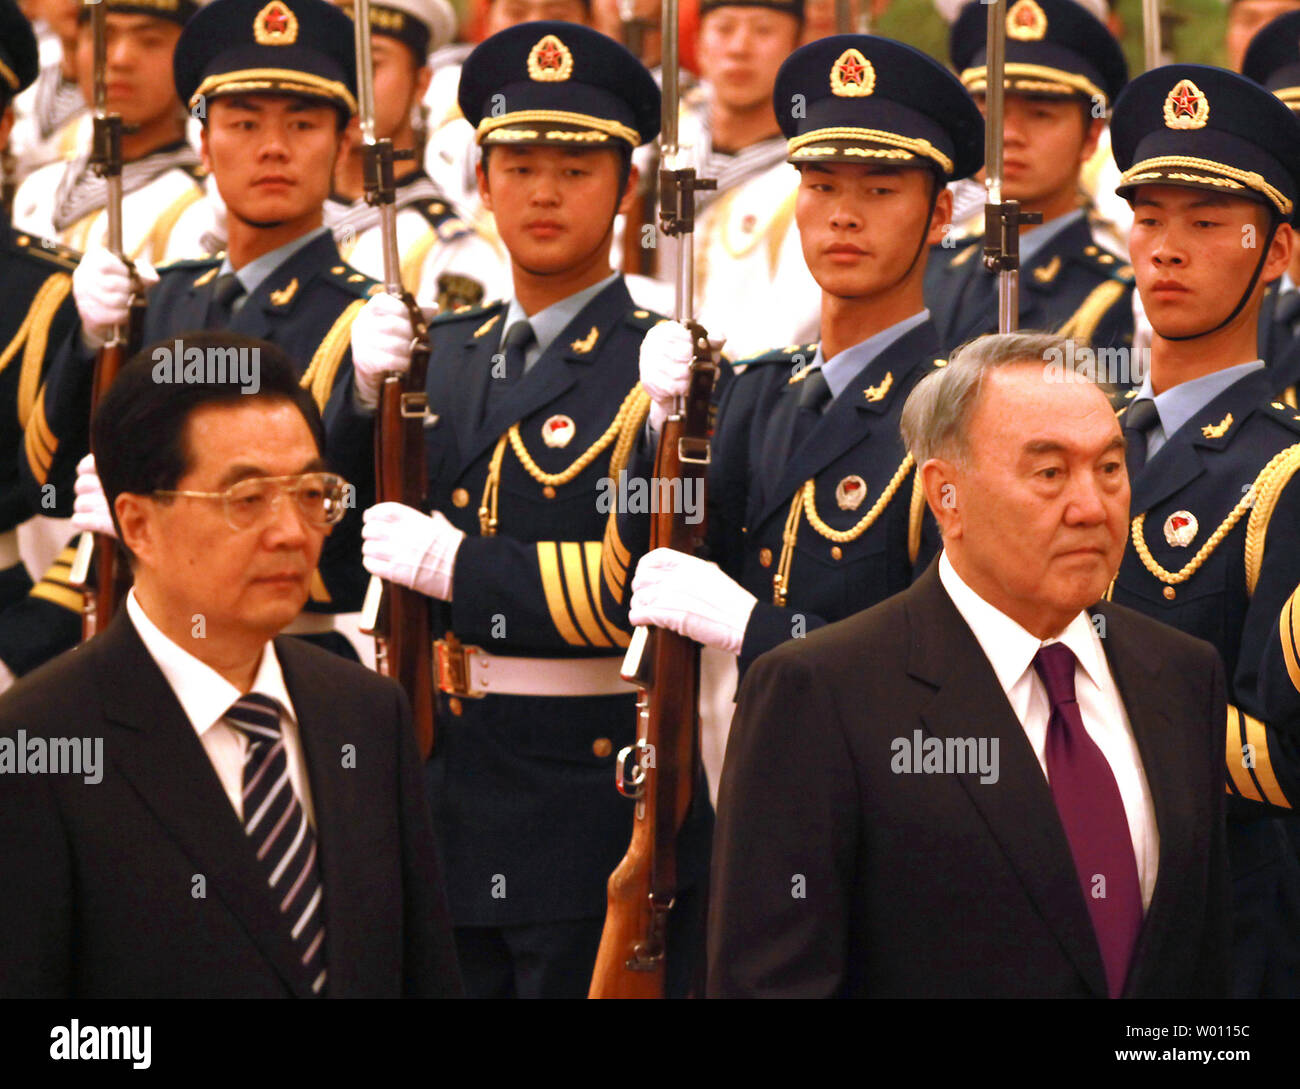 Chinese President Hu Jintao (L) escorts Kazakhstan's President Nursultan Nazarbayev past a military honor guard during a welcoming ceremony in the Great Hall of the People in Beijing on June 6, 2012.  Presidents from Tajikistan, Kyrgyzstan, Russia, Kazakhstan, Turkmenistan, Uzbekistan, Afghanistan, Pakistan and Iran are in China's capital for the 12th meeting of the Council of the Heads of the Shanghai Cooperation Organization Summit.      UPI/Stephen Shaver Stock Photo